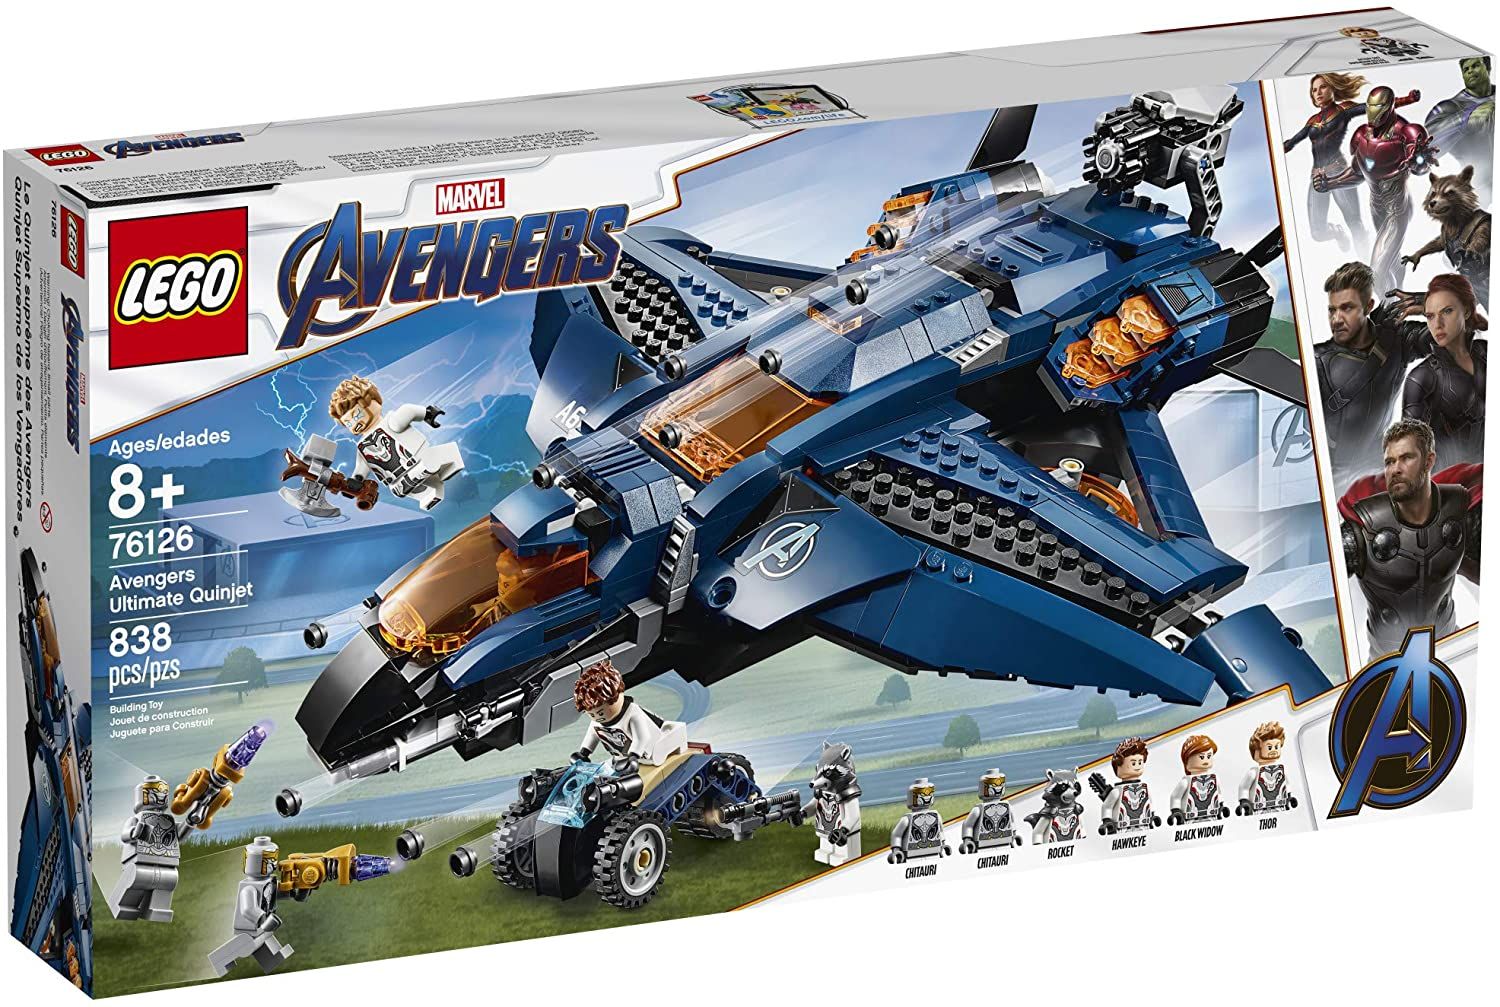 10 Best LEGO Sets (Updated 2020)